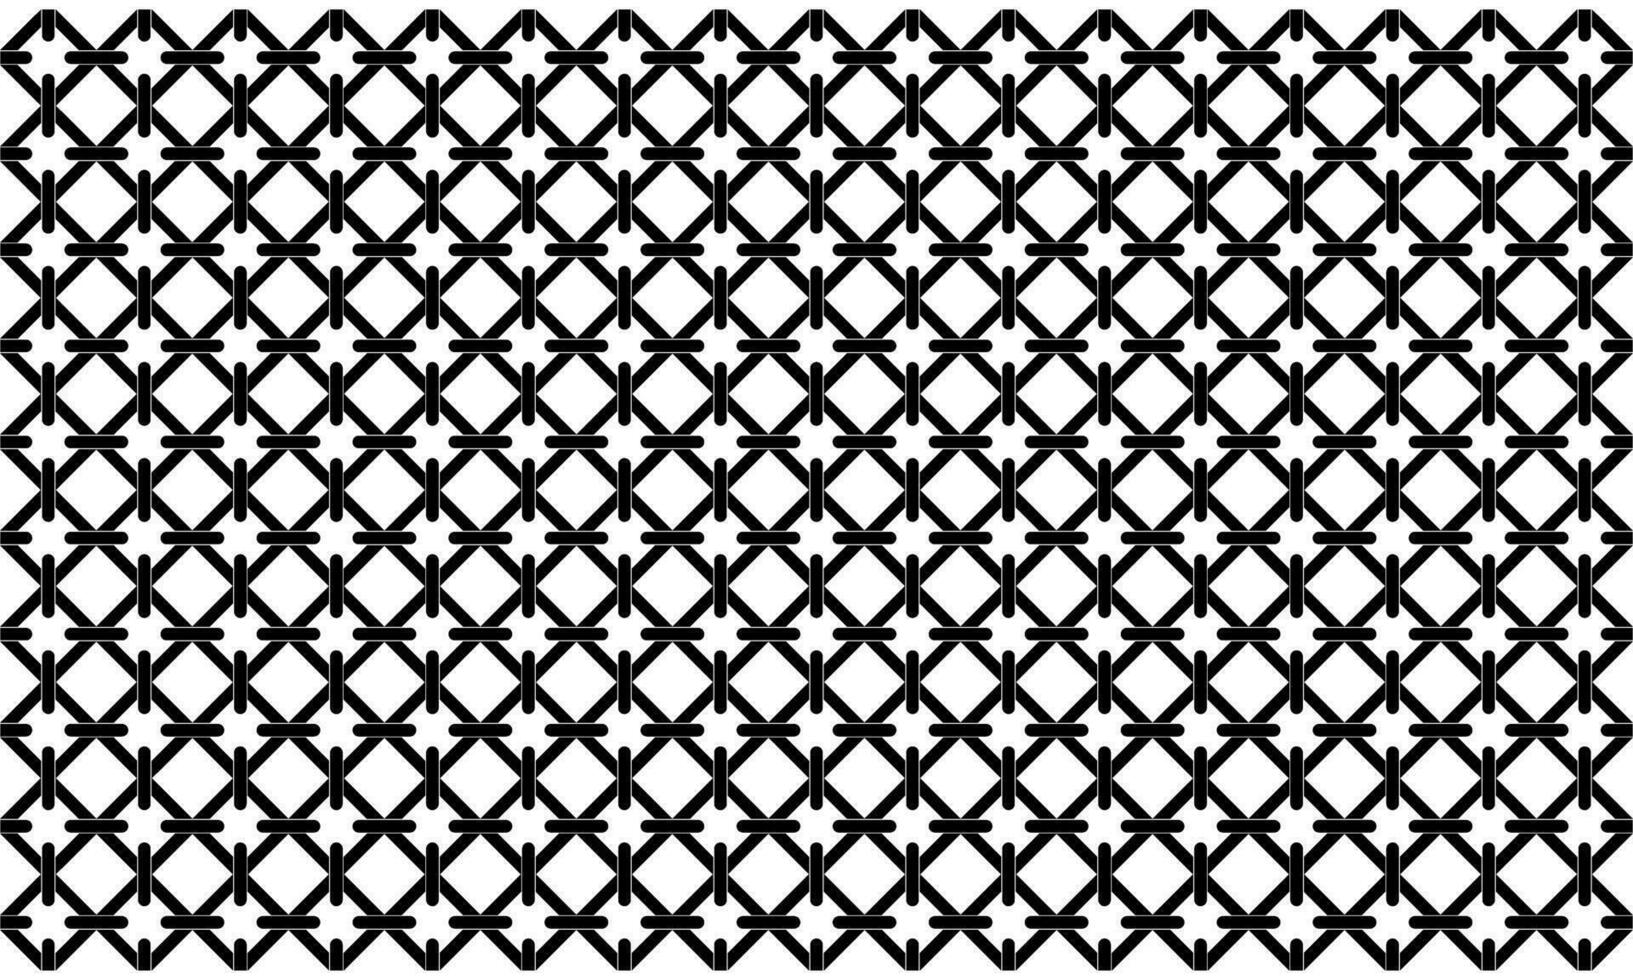 Crosshatching Motifs Pattern Square and Rhombus, Modern Contemporary Pattern Style, can use for Decoration, Background, Ornate, Wallpaper, Carpet, Tile, Floor, Fashion, Fabric, Textile, ect. vector